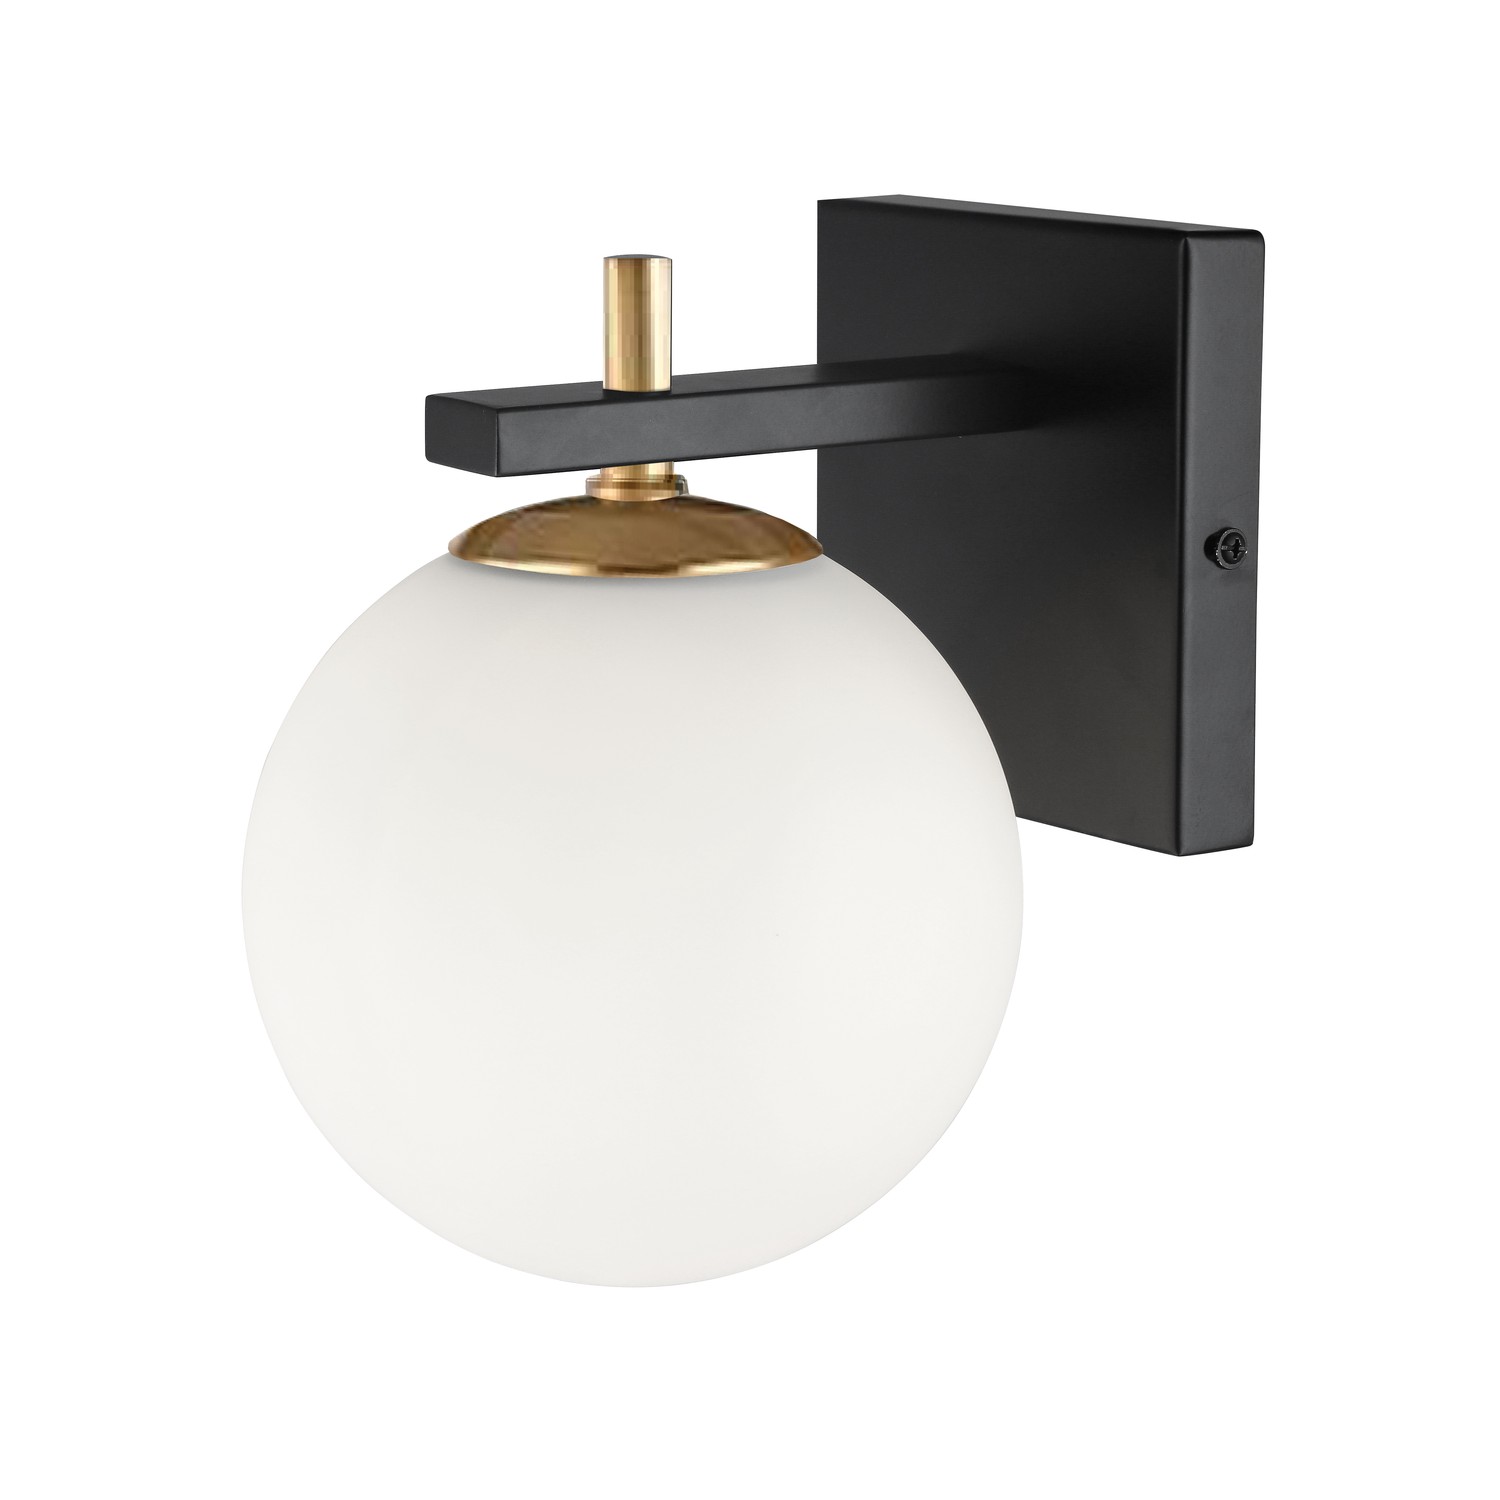 1 Light Halogen Wall Sconce, Matte Black and Aged Brass